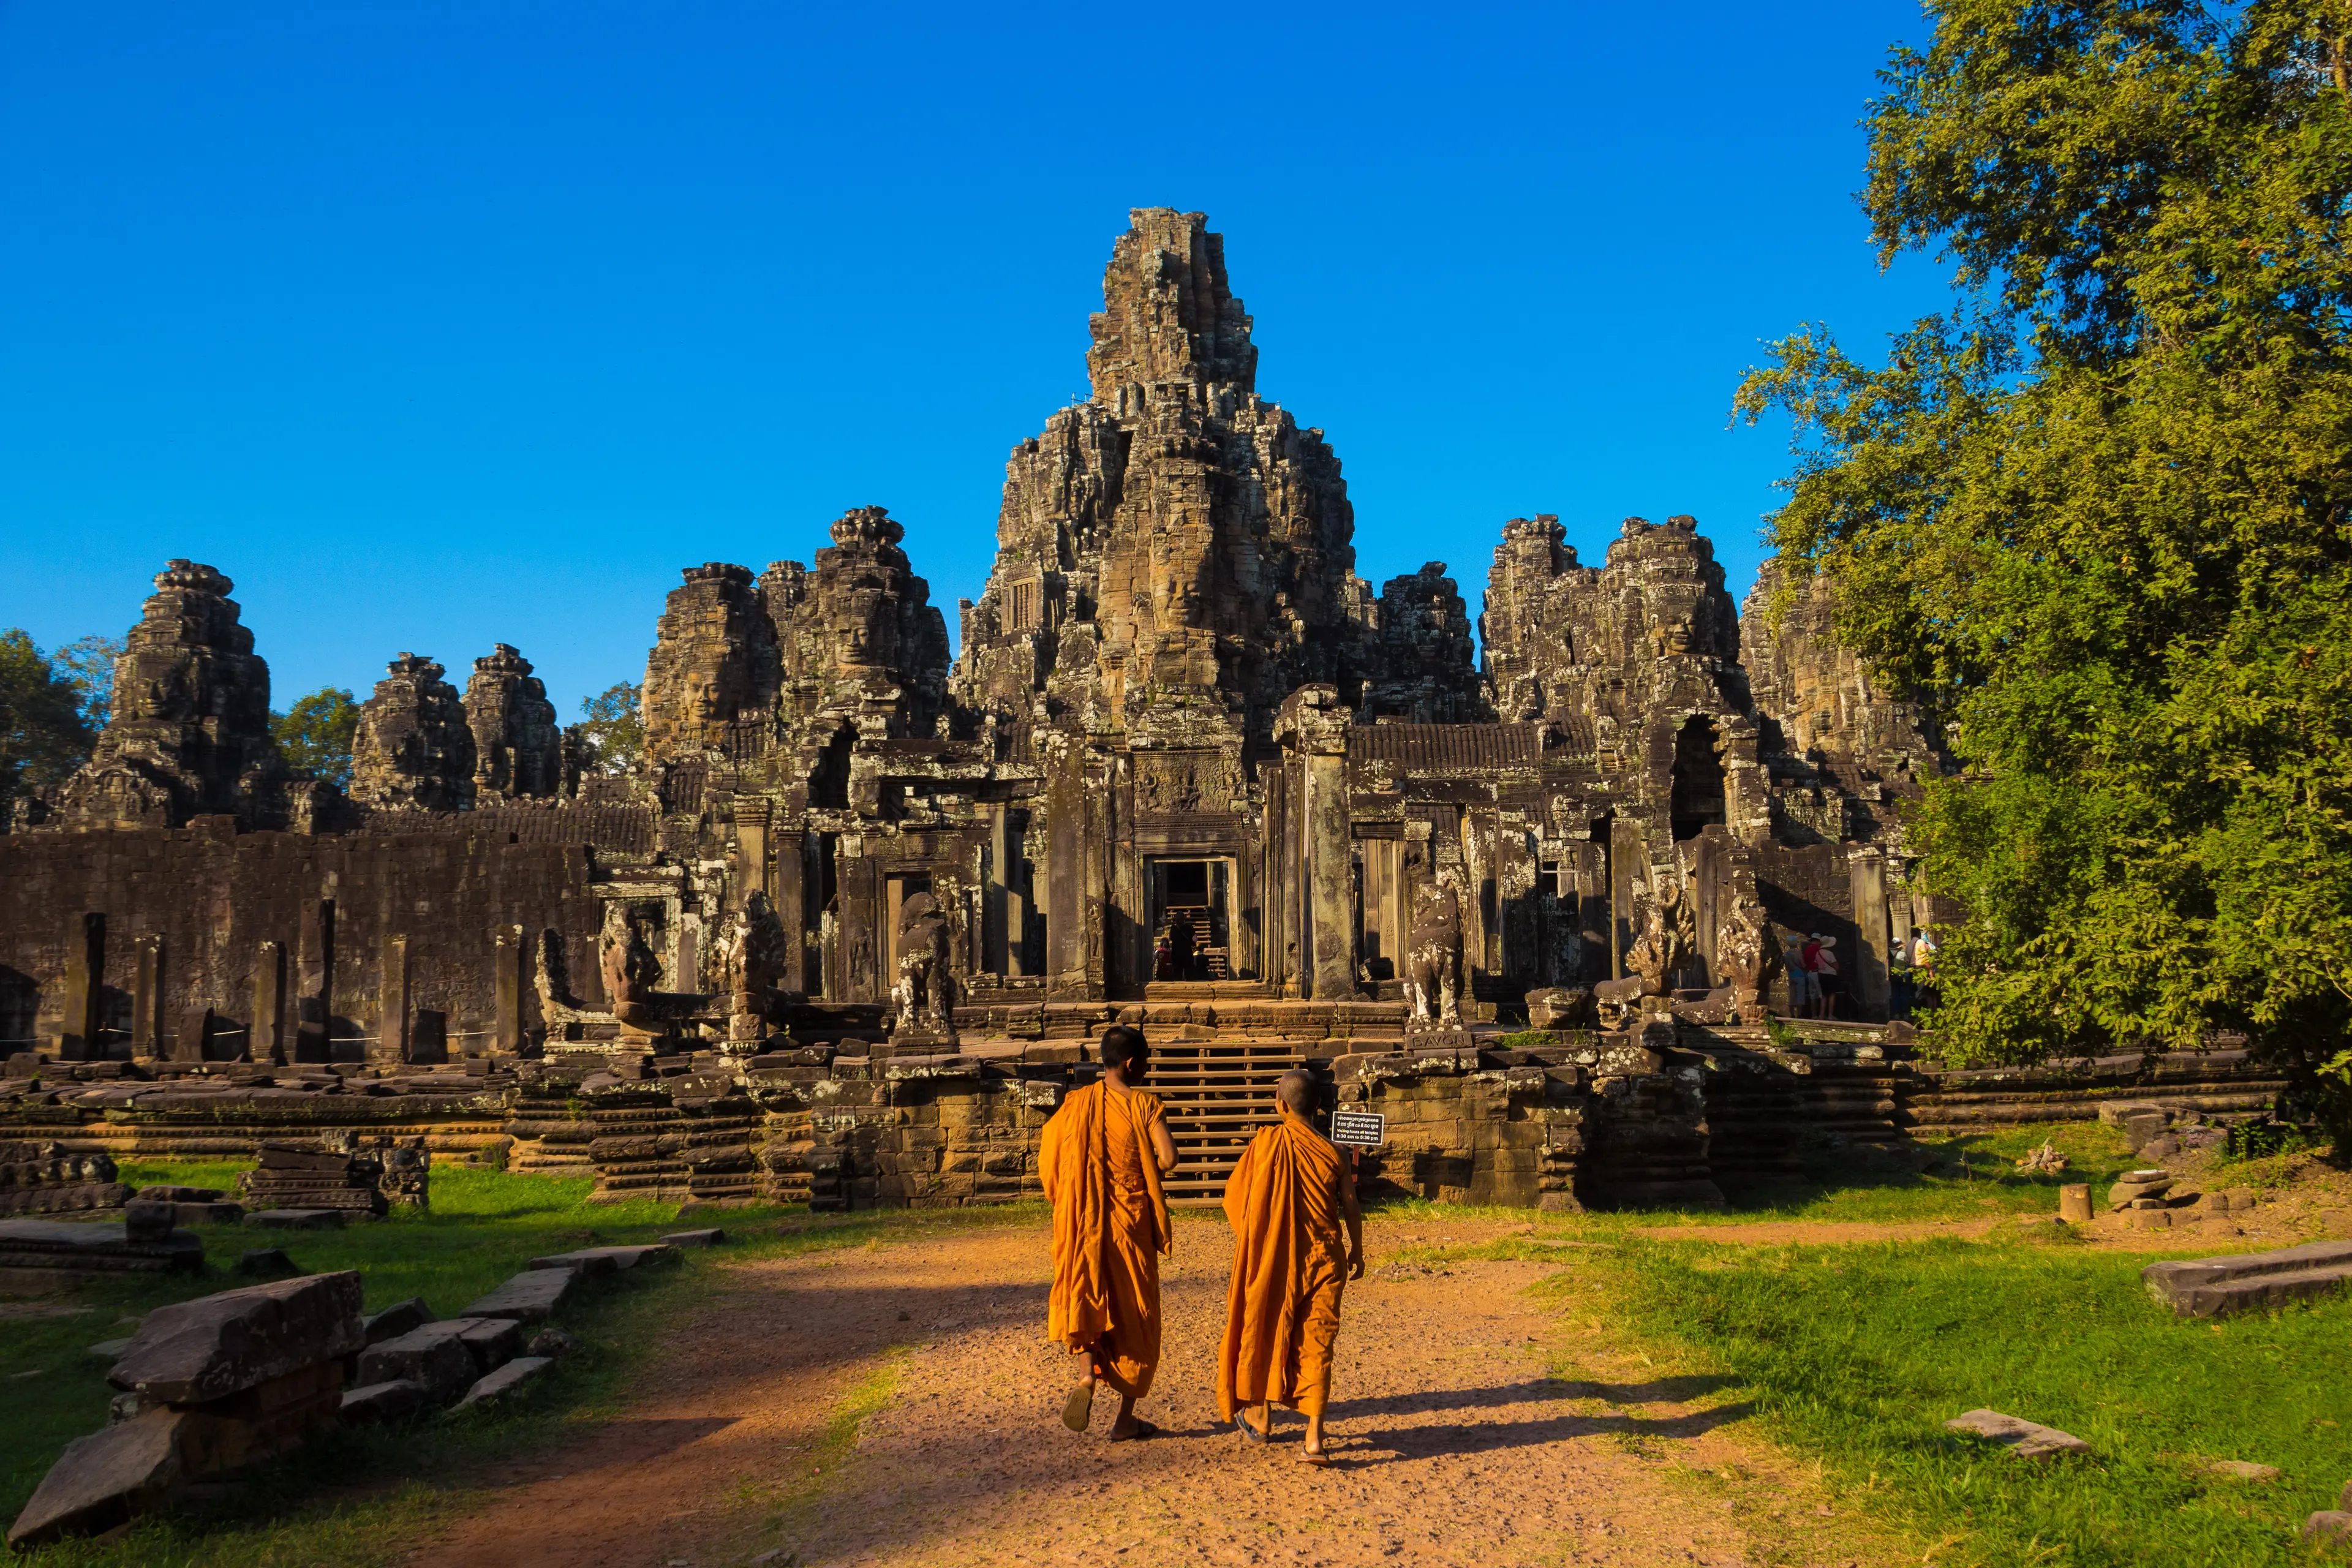 The monks in the ancient stone faces of Bayon temple